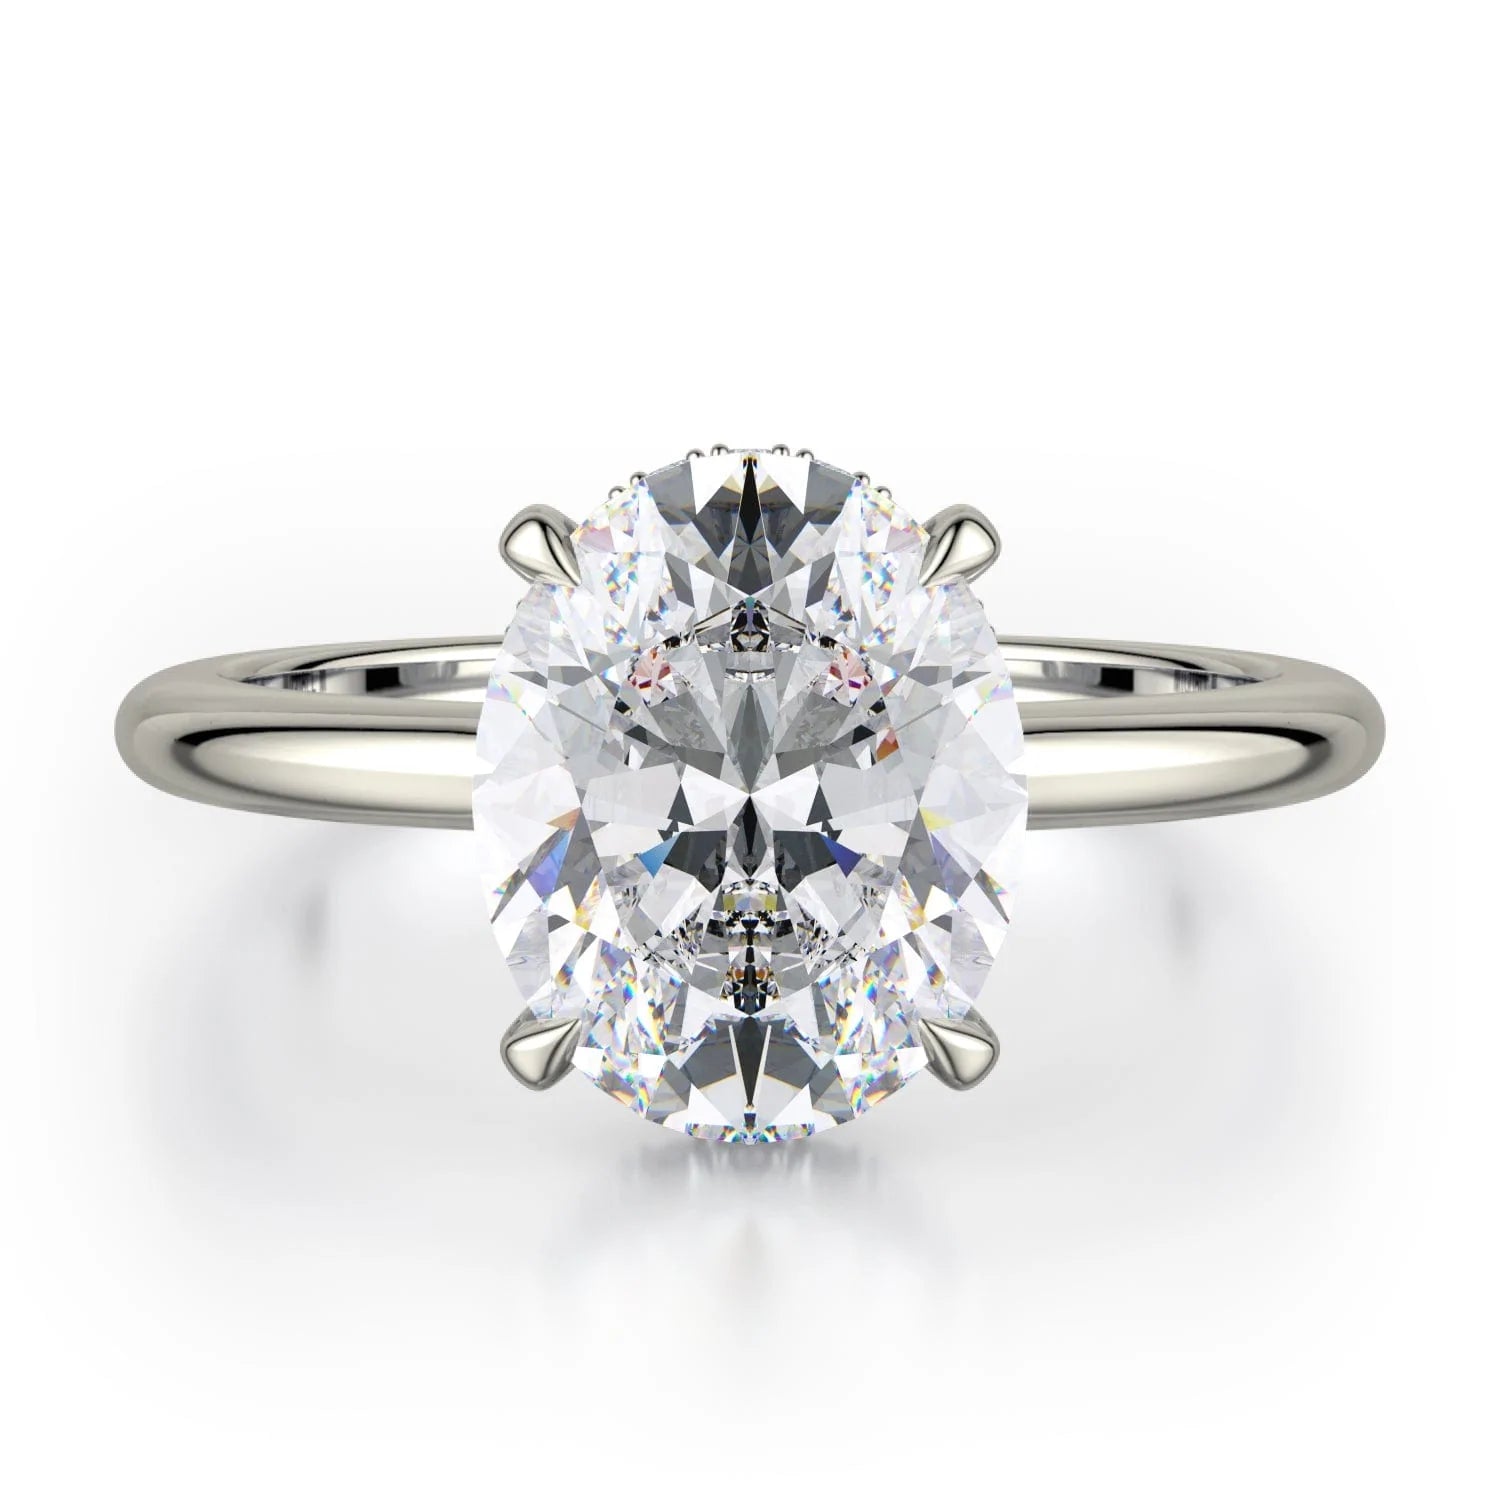 MICHAEL M Engagement Rings 18K White Gold CROWN R750-3 Oval-Cut Diamond Solitaire R750-3WG